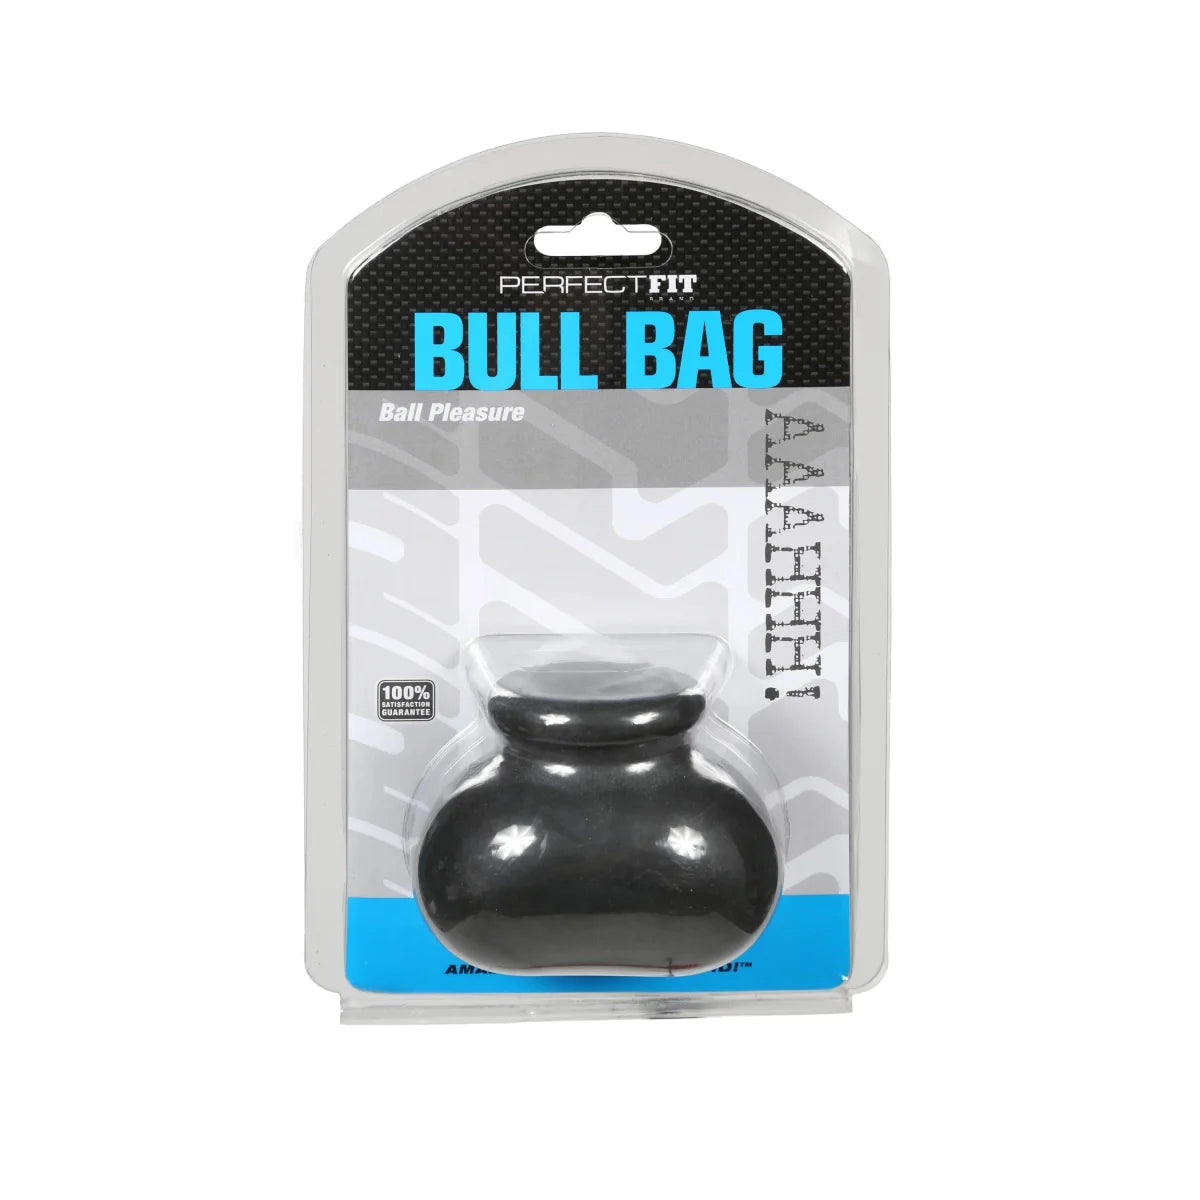 Bull Bag 0.75 Ball Stretcher Intimates Adult Boutique